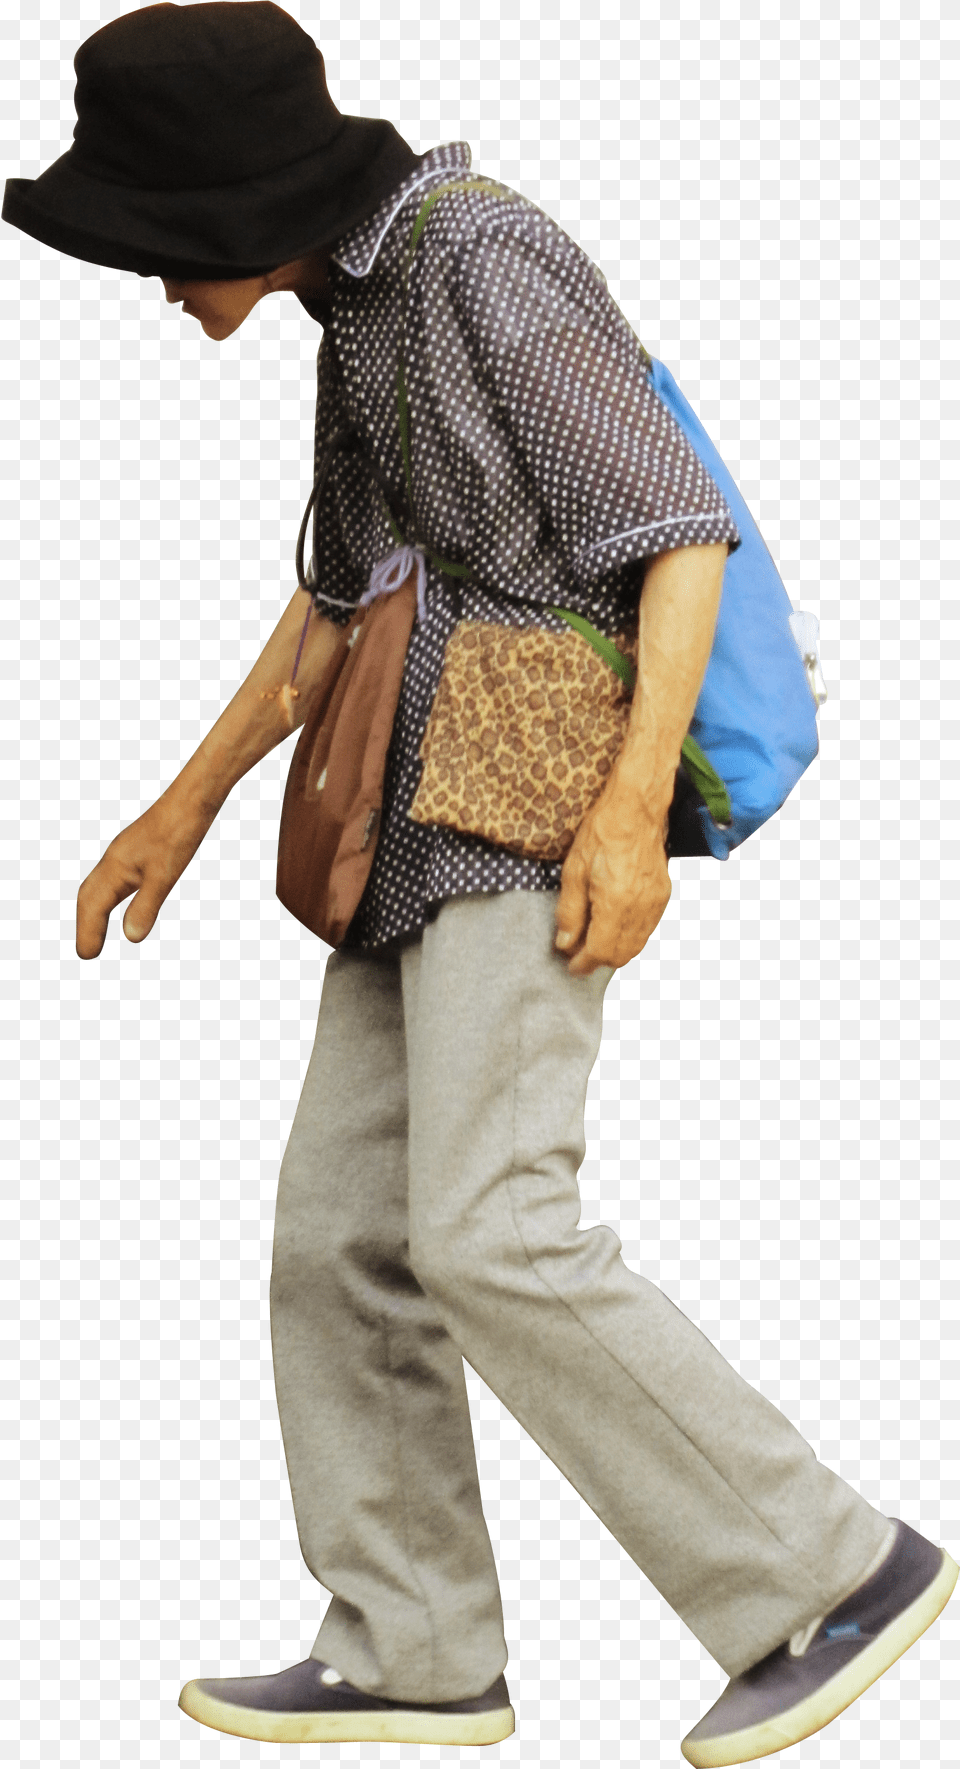 Old Woman Walking Away Nutrient Deficiency Related Chronic Disease, Accessories, Hat, Handbag, Clothing Png Image